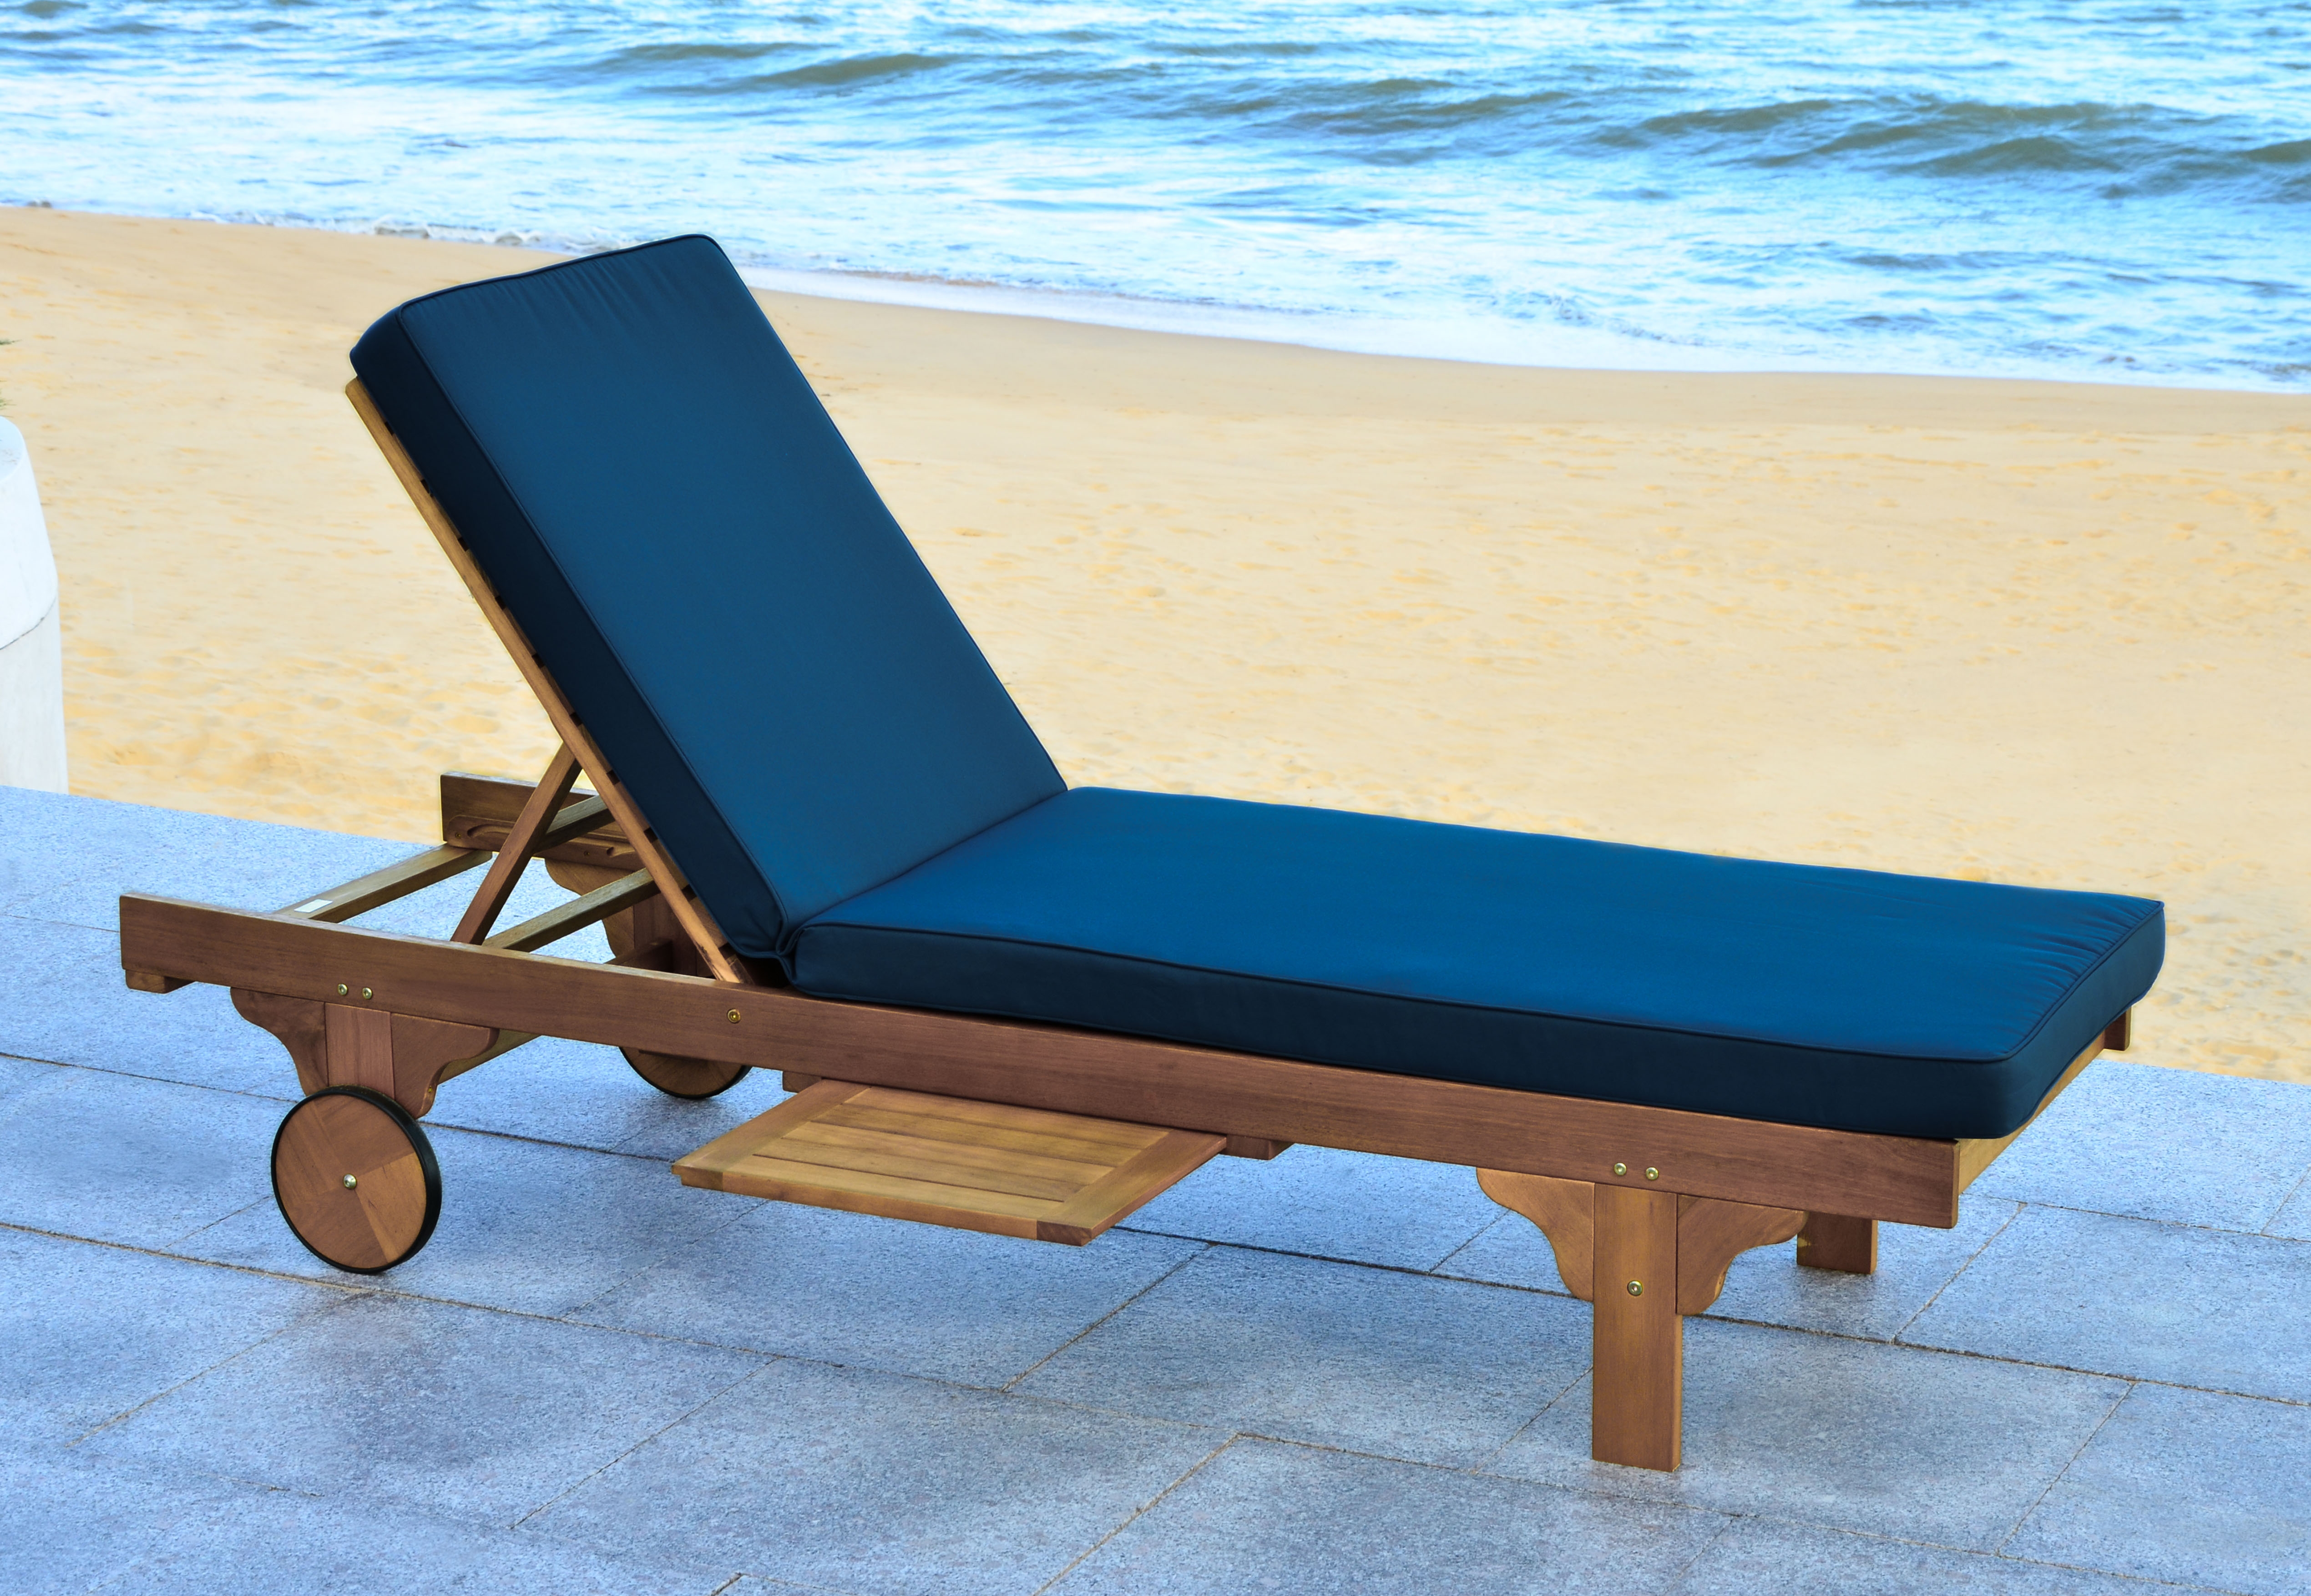 Newport Chaise Lounge Chair With Side Table - Natural/Navy - Safavieh - Image 8